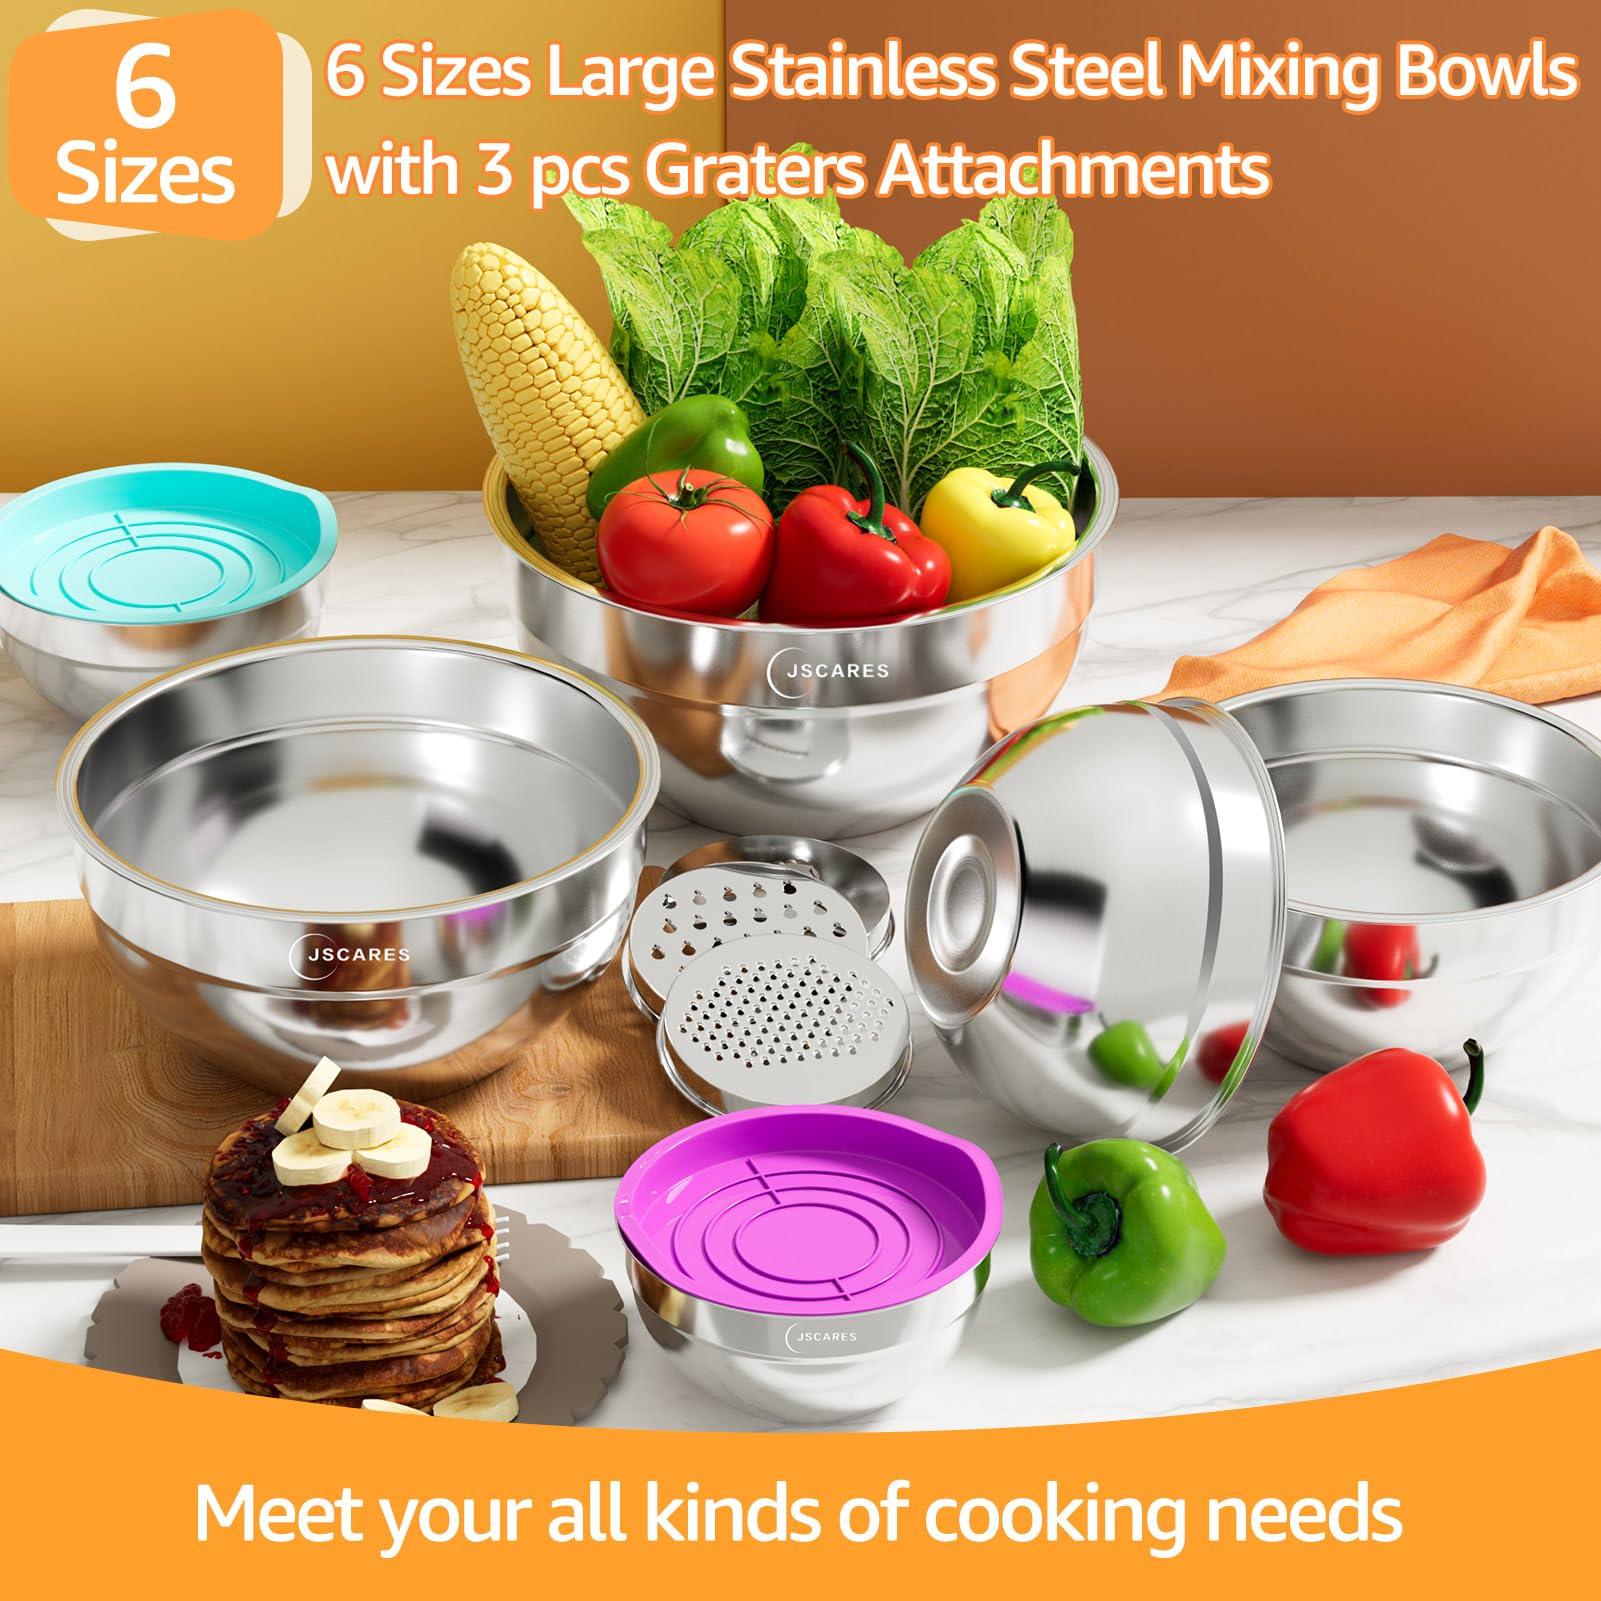 JSCARES 6pc Stainless Steel Mixing Bowls with Airtight Lids and 3 Graters - Colorful, Airtight, 0.7QT to 4.5QT - CookCave